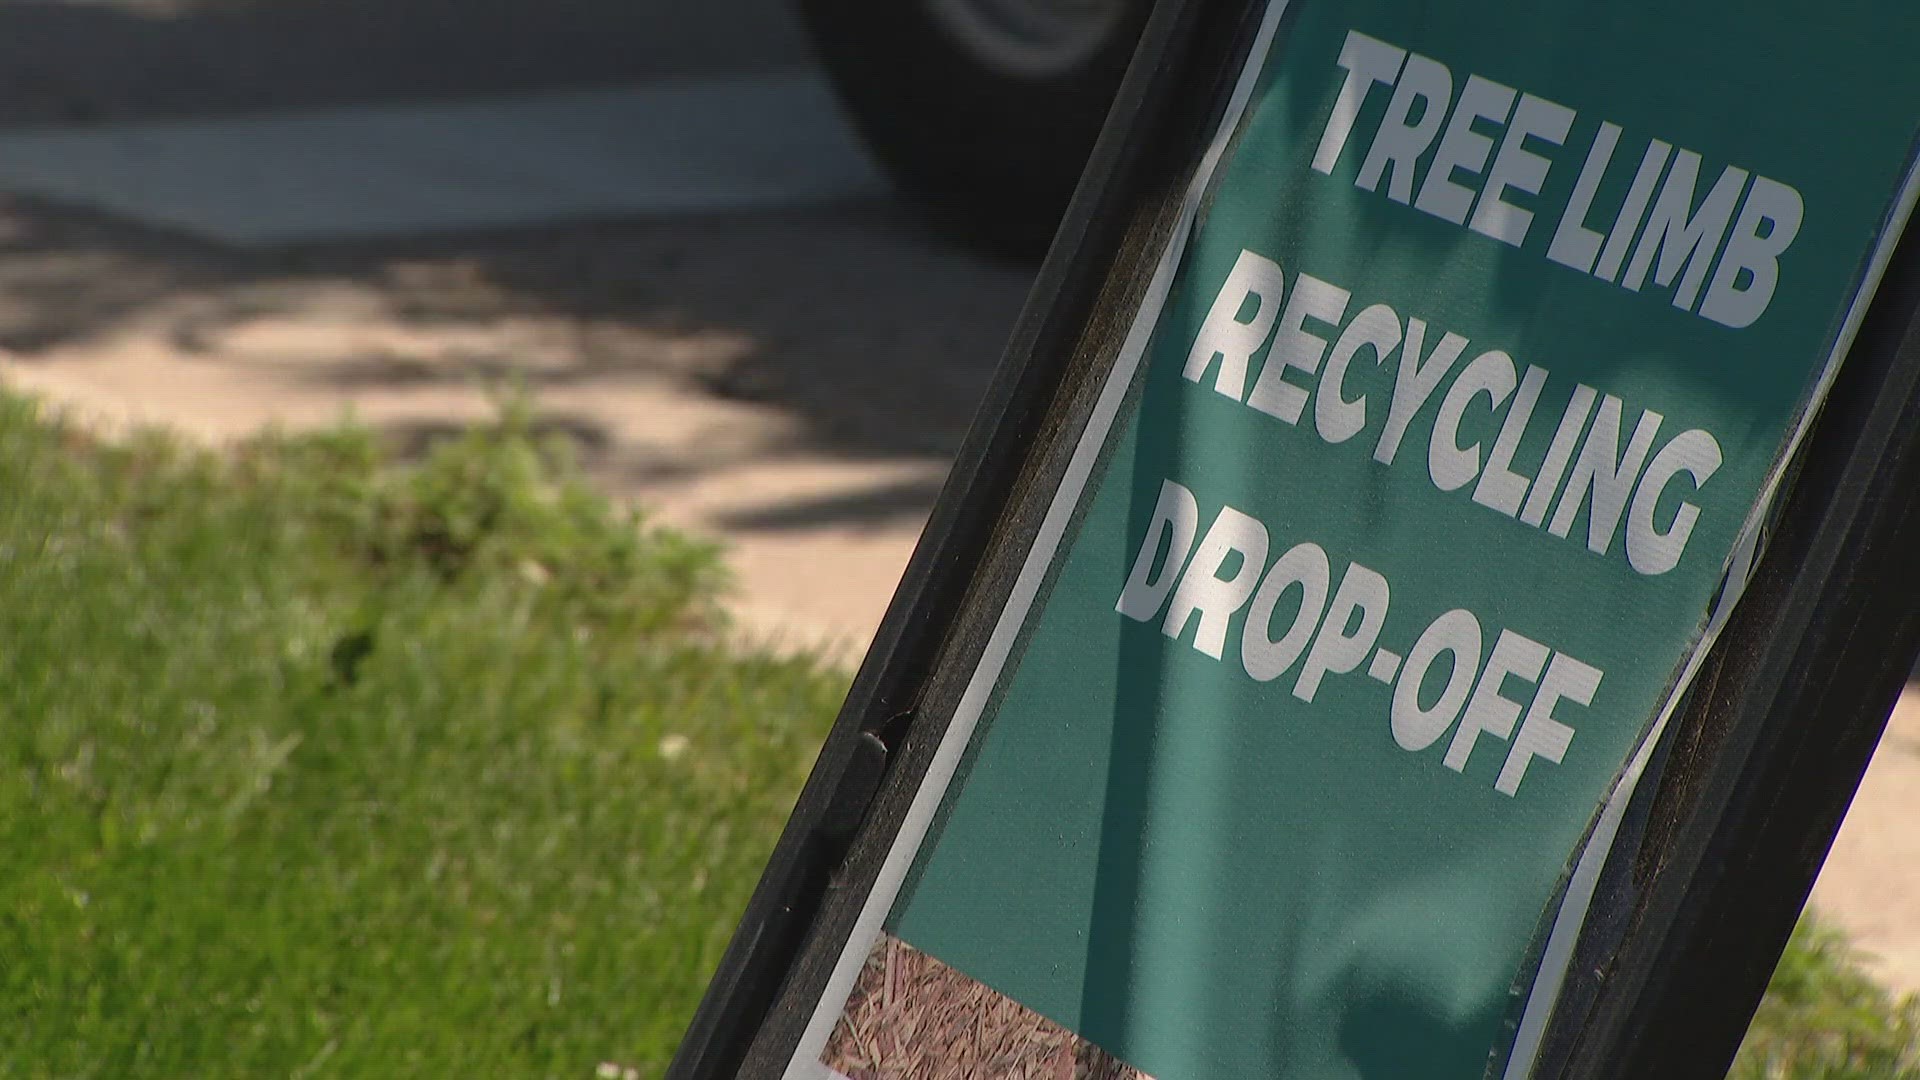 Three drop-off sites for tree debris are being opened after a tornado moved through Highlands Ranch Thursday. A disaster was declared by the county.